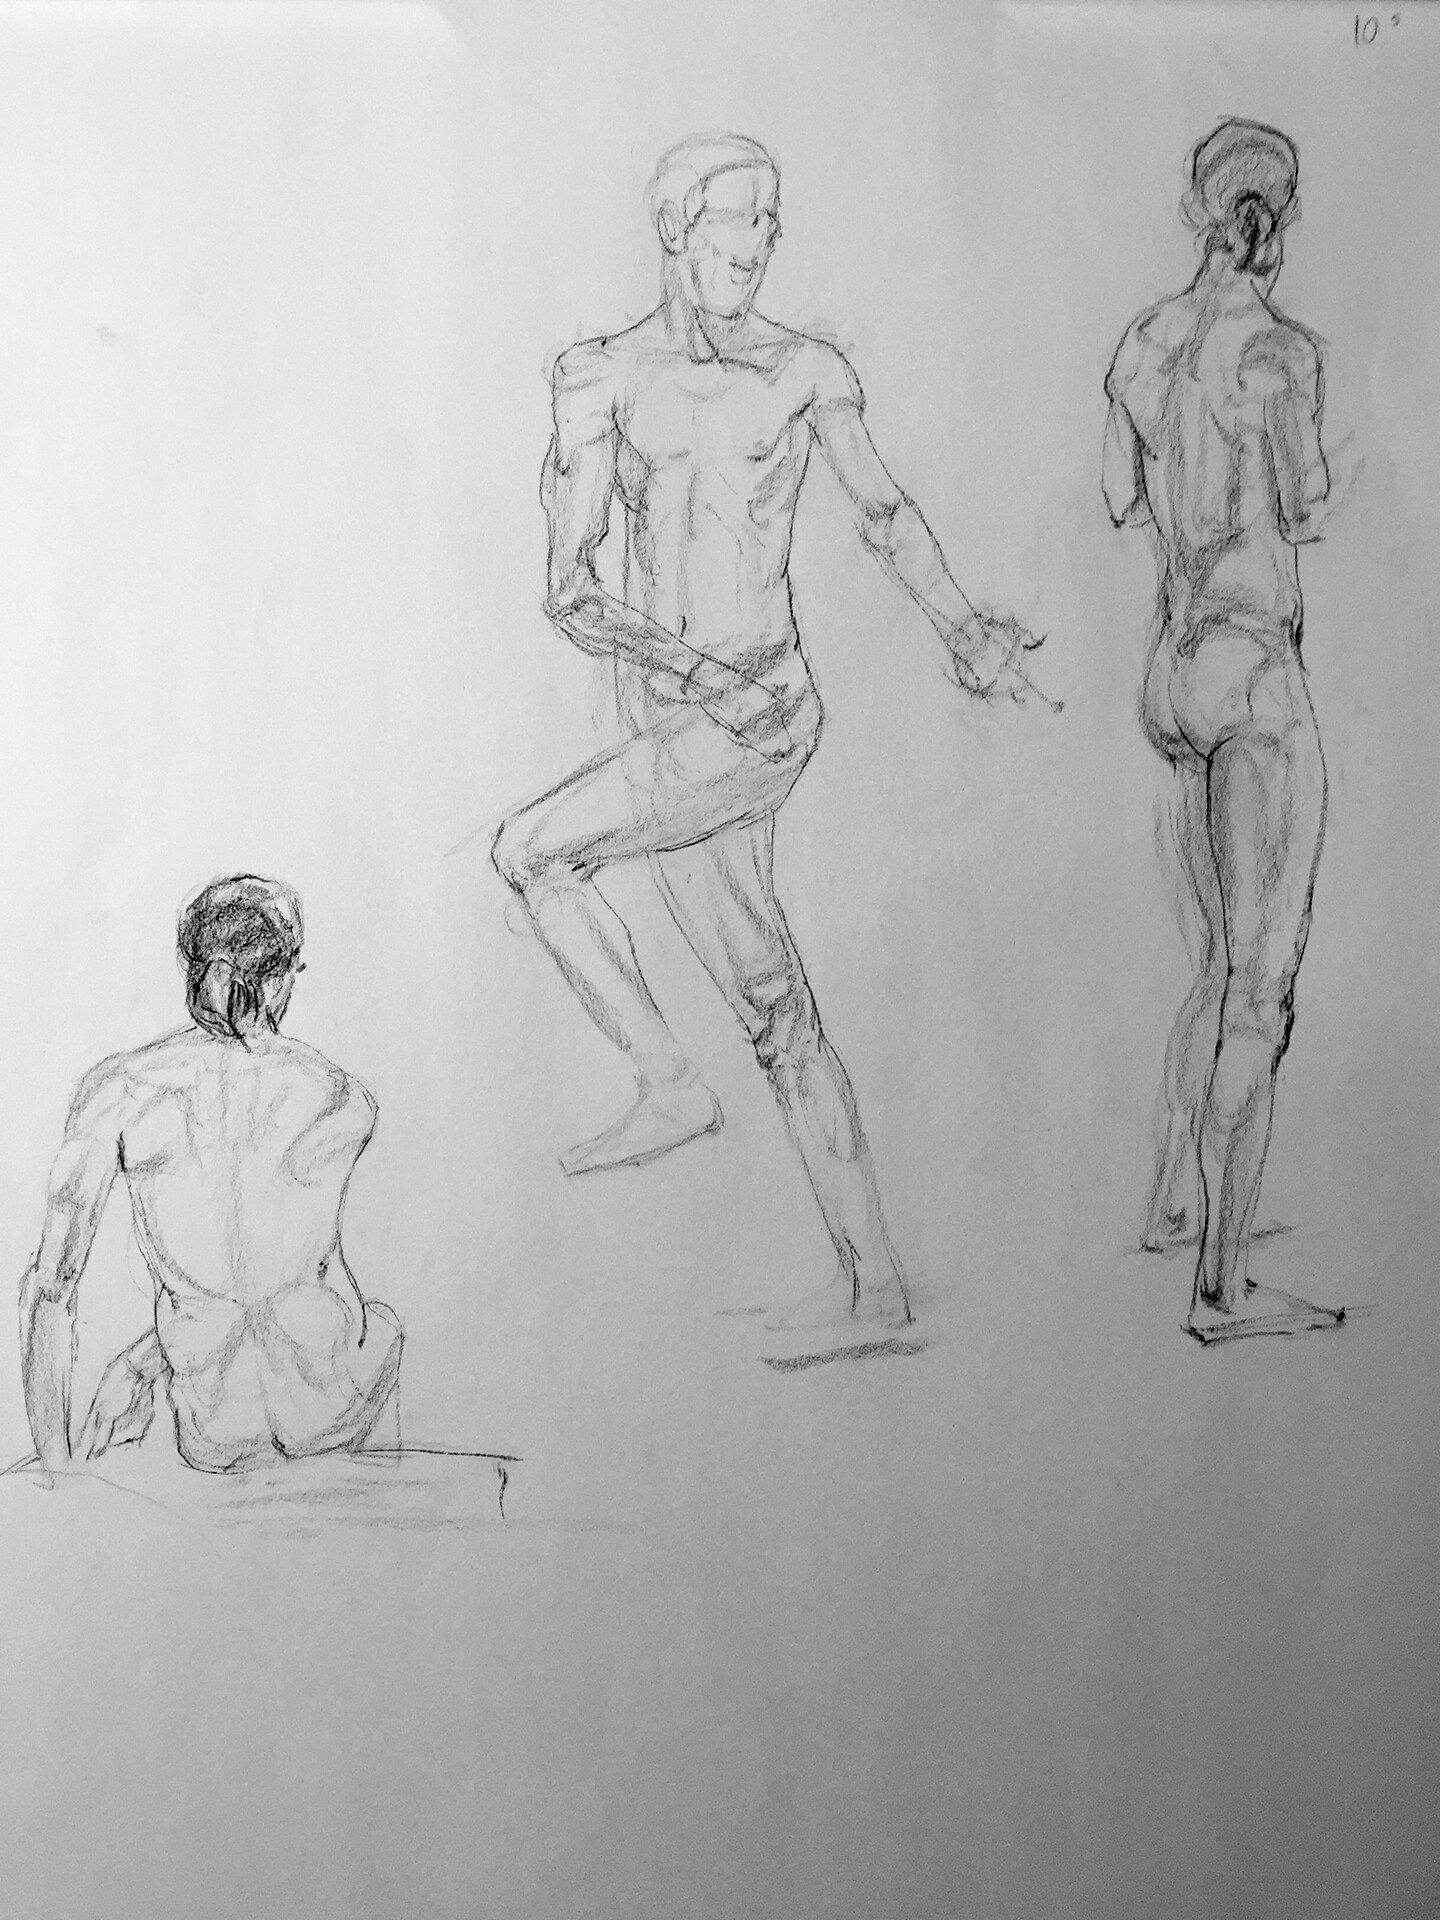 Life Drawing - Male - Action poses - 5 Min by AshliBell-Bowling on  DeviantArt